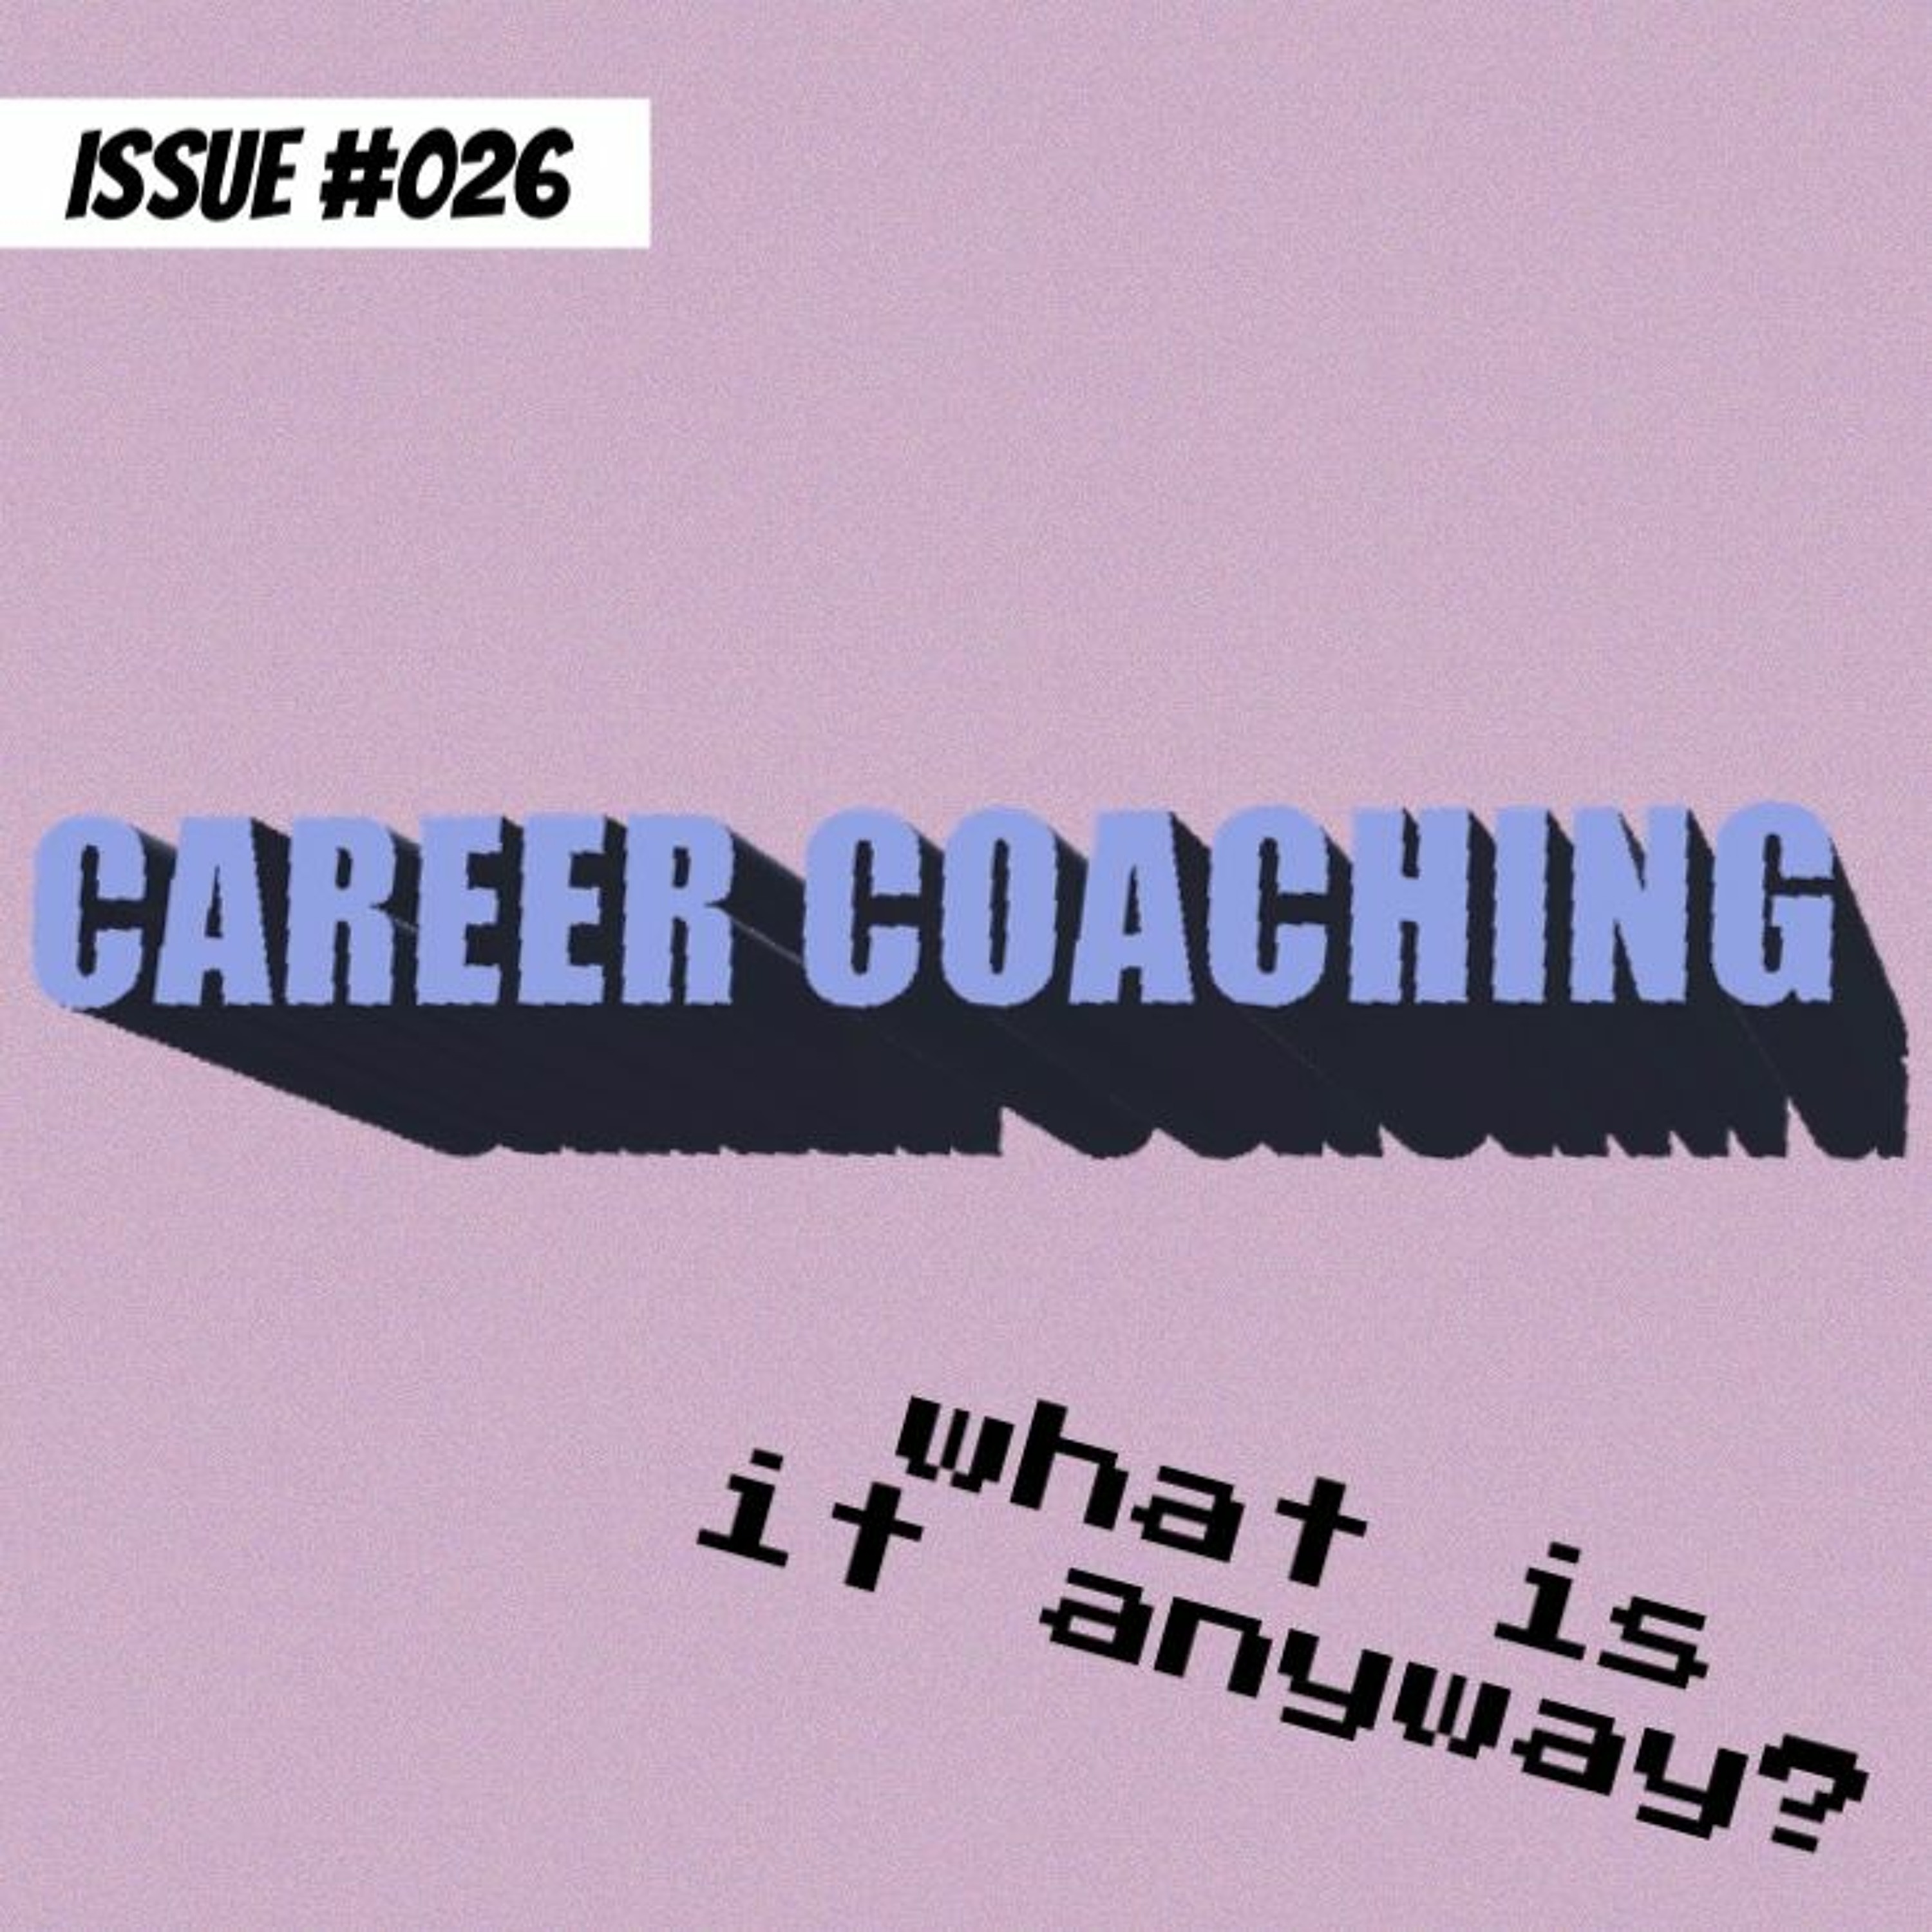 What Is A Career Coach Anyway?